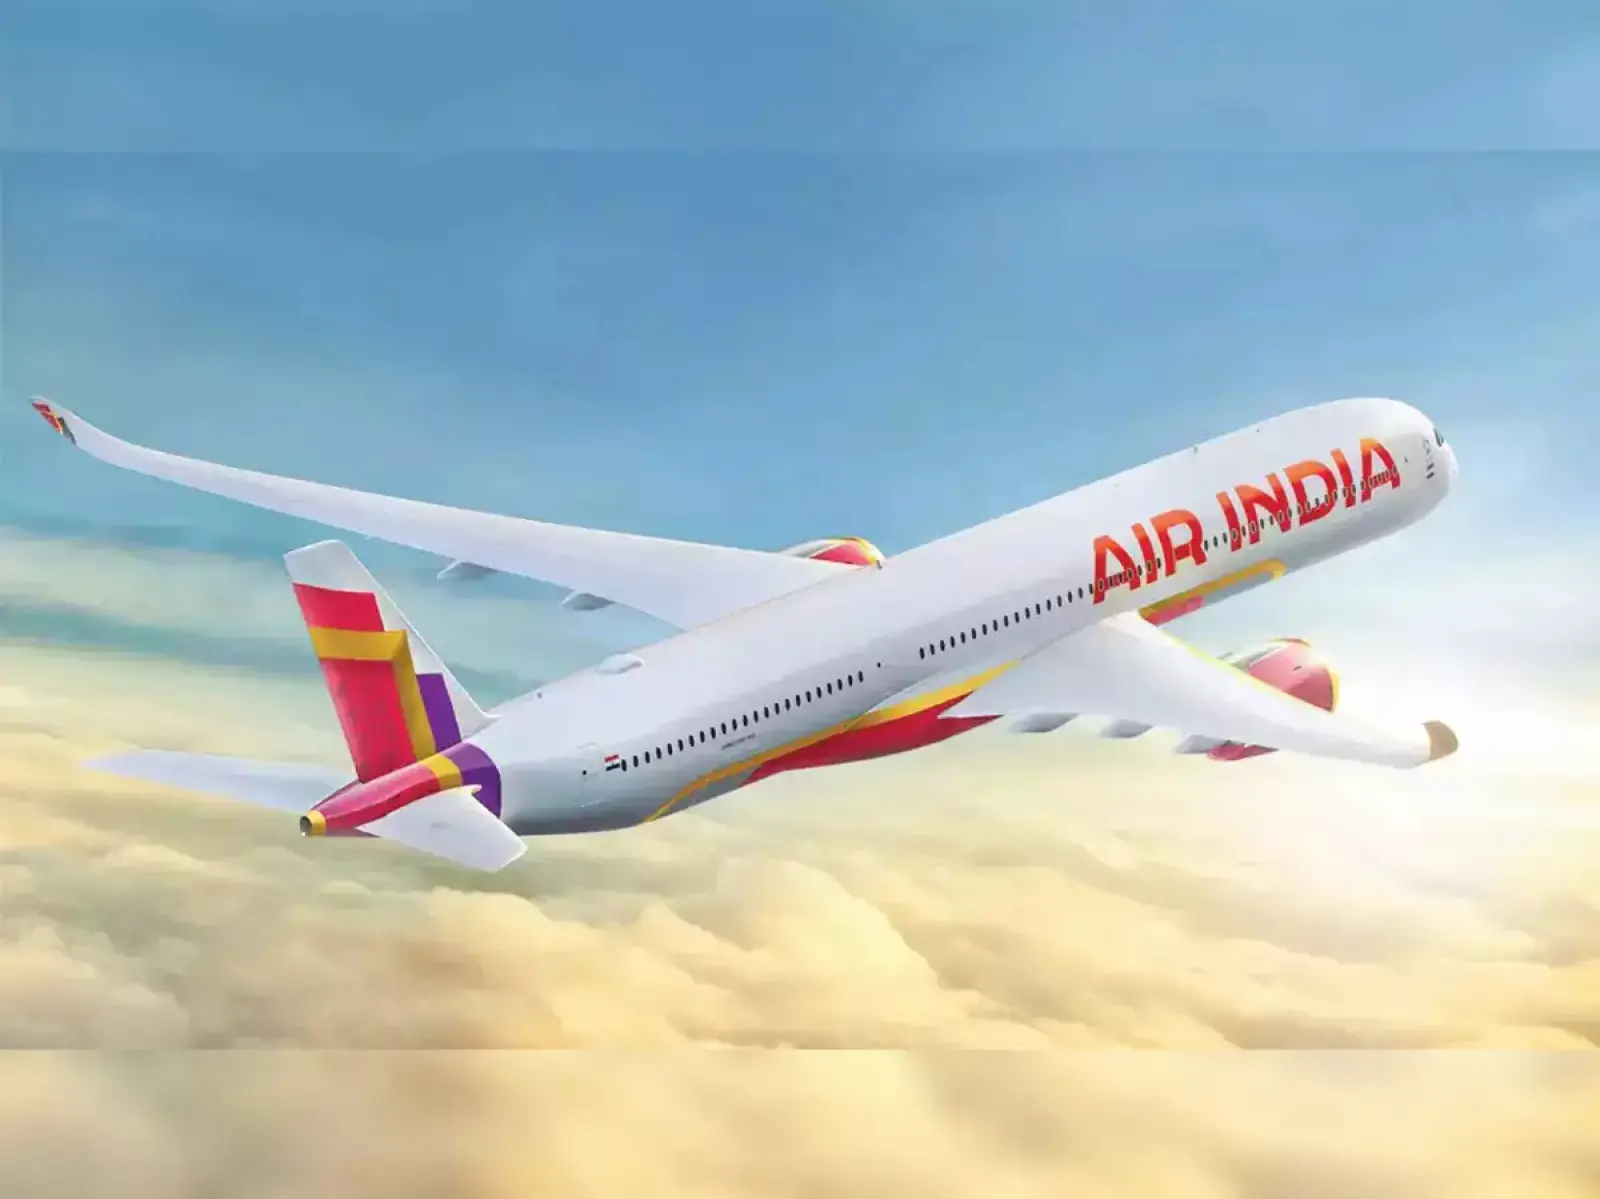 Way for the merger of Air India and Vistara is cleared, the National Company Law Tribunal approved